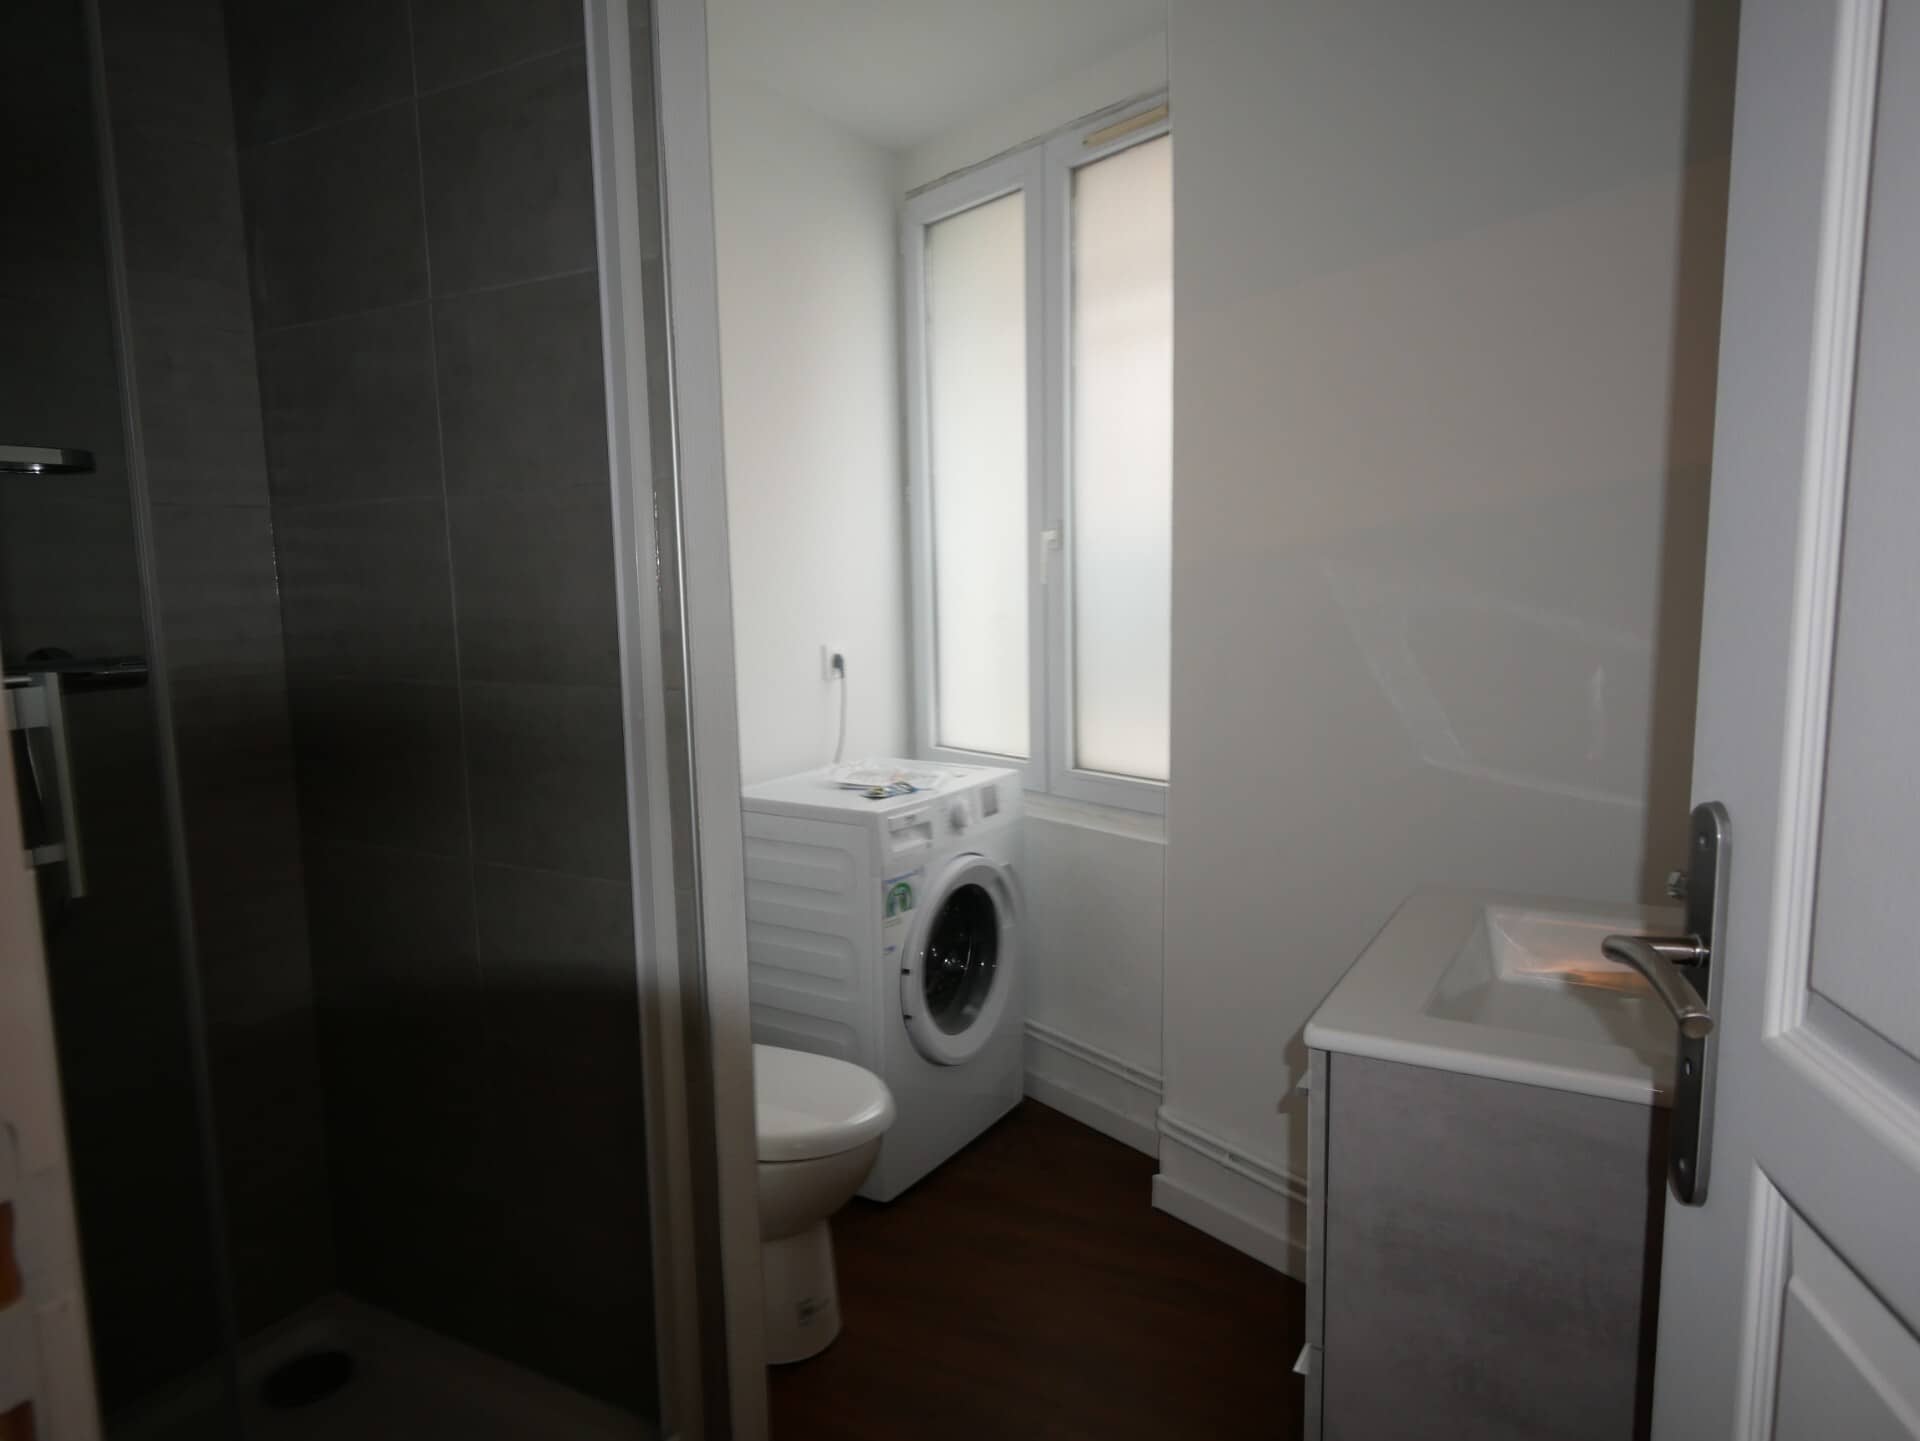 Location Appartement type F1 Le Havre M09